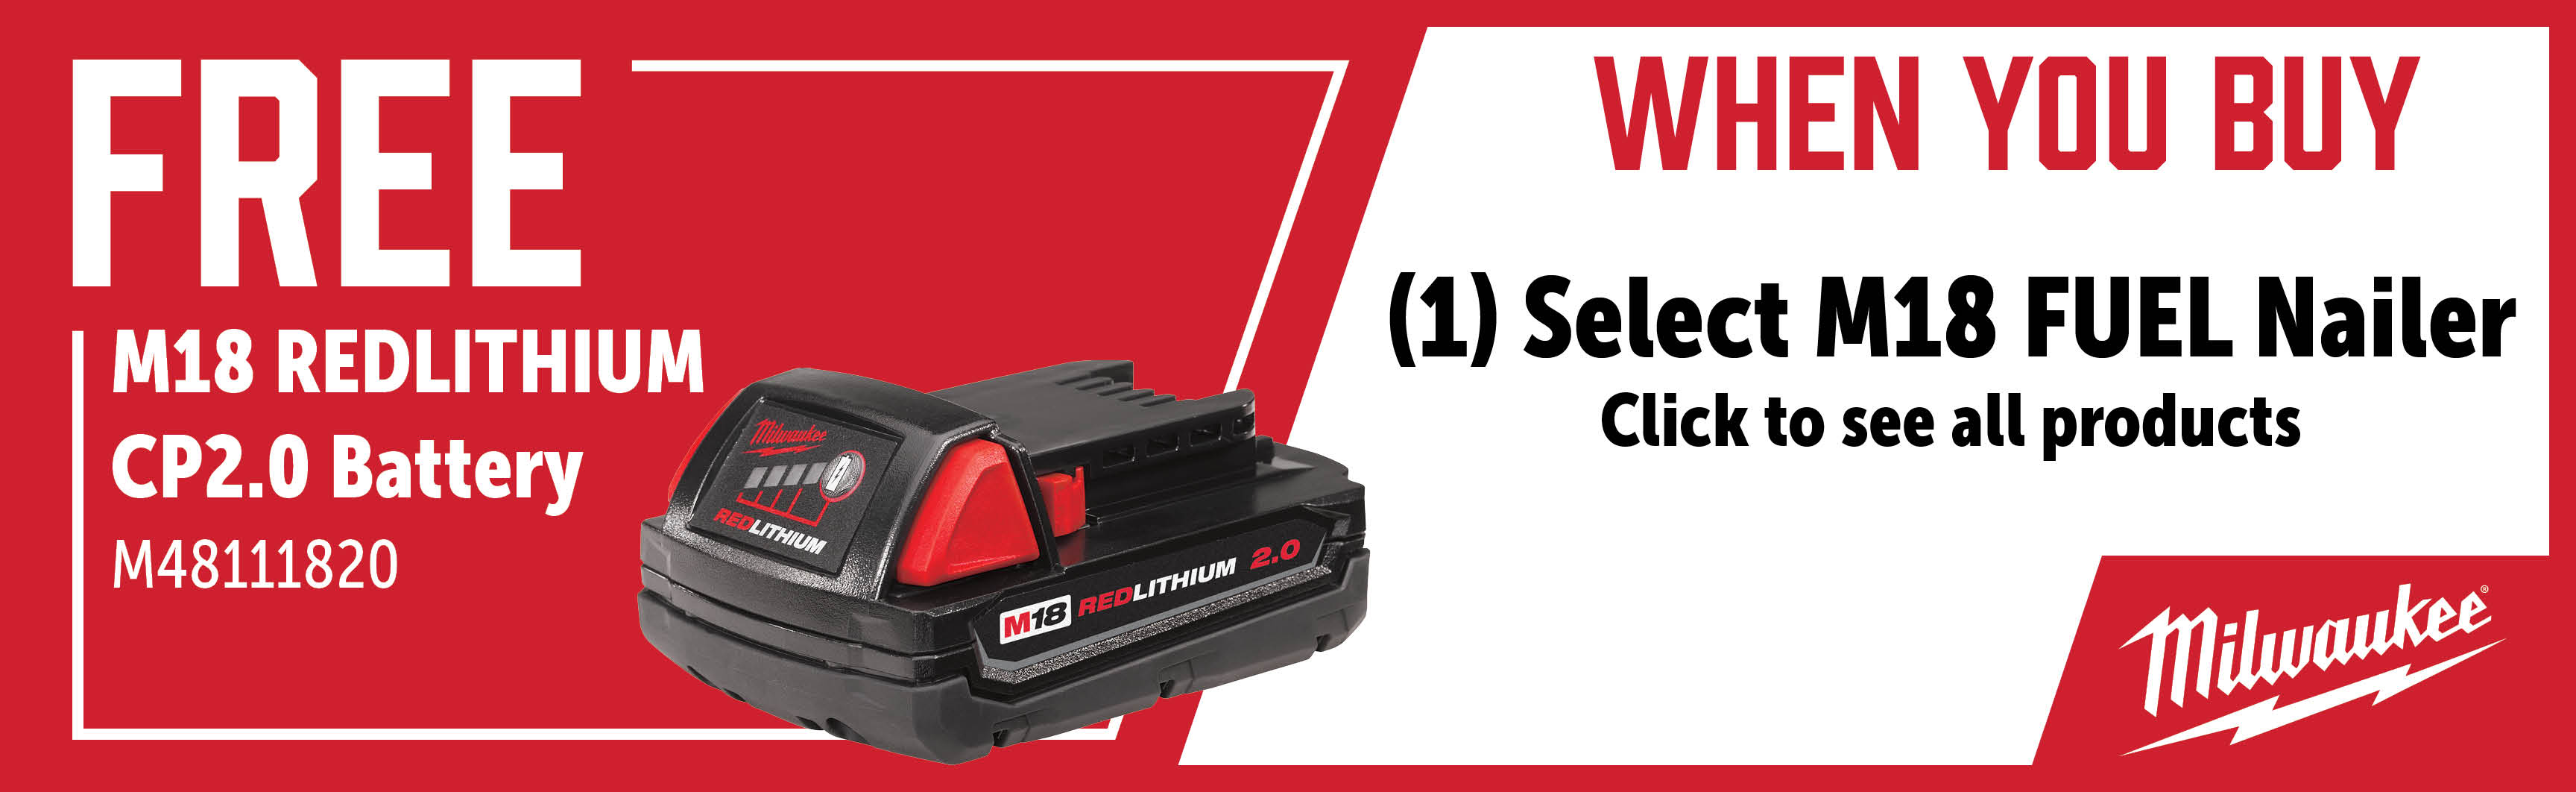 Milwaukee May - July: Buy a Qualifying M18 Nailer get a FREE M48111820 Battery